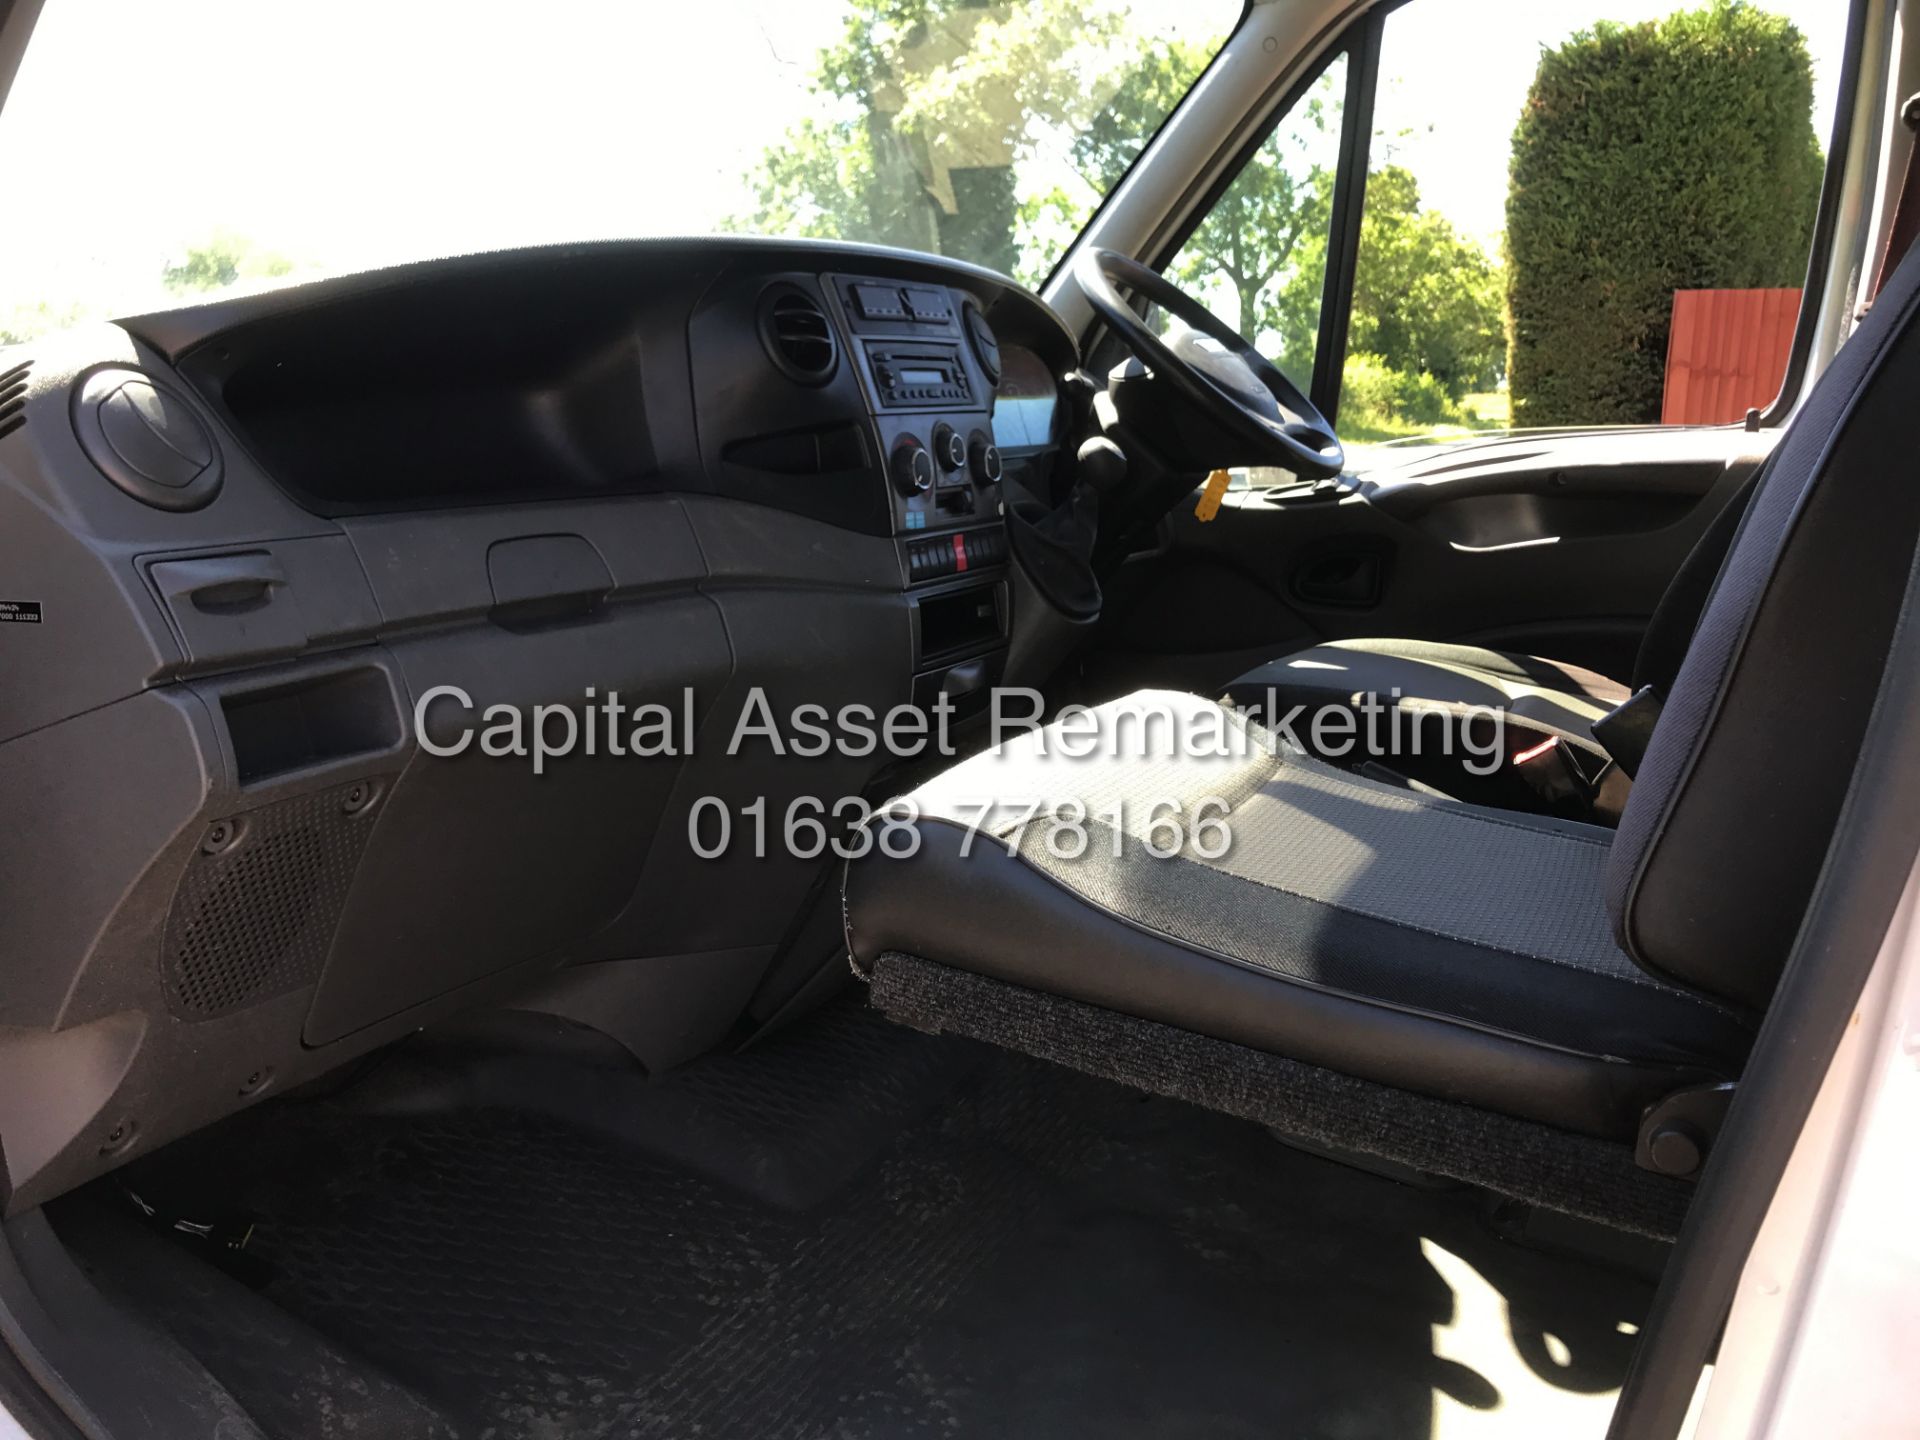 IVECO DAILY 35S11 LONG WHEEL BASE CHASSIS CAB - 14 REG - 1 OWNER - ONLY 132K MILES - WOW!!!! - Image 9 of 13